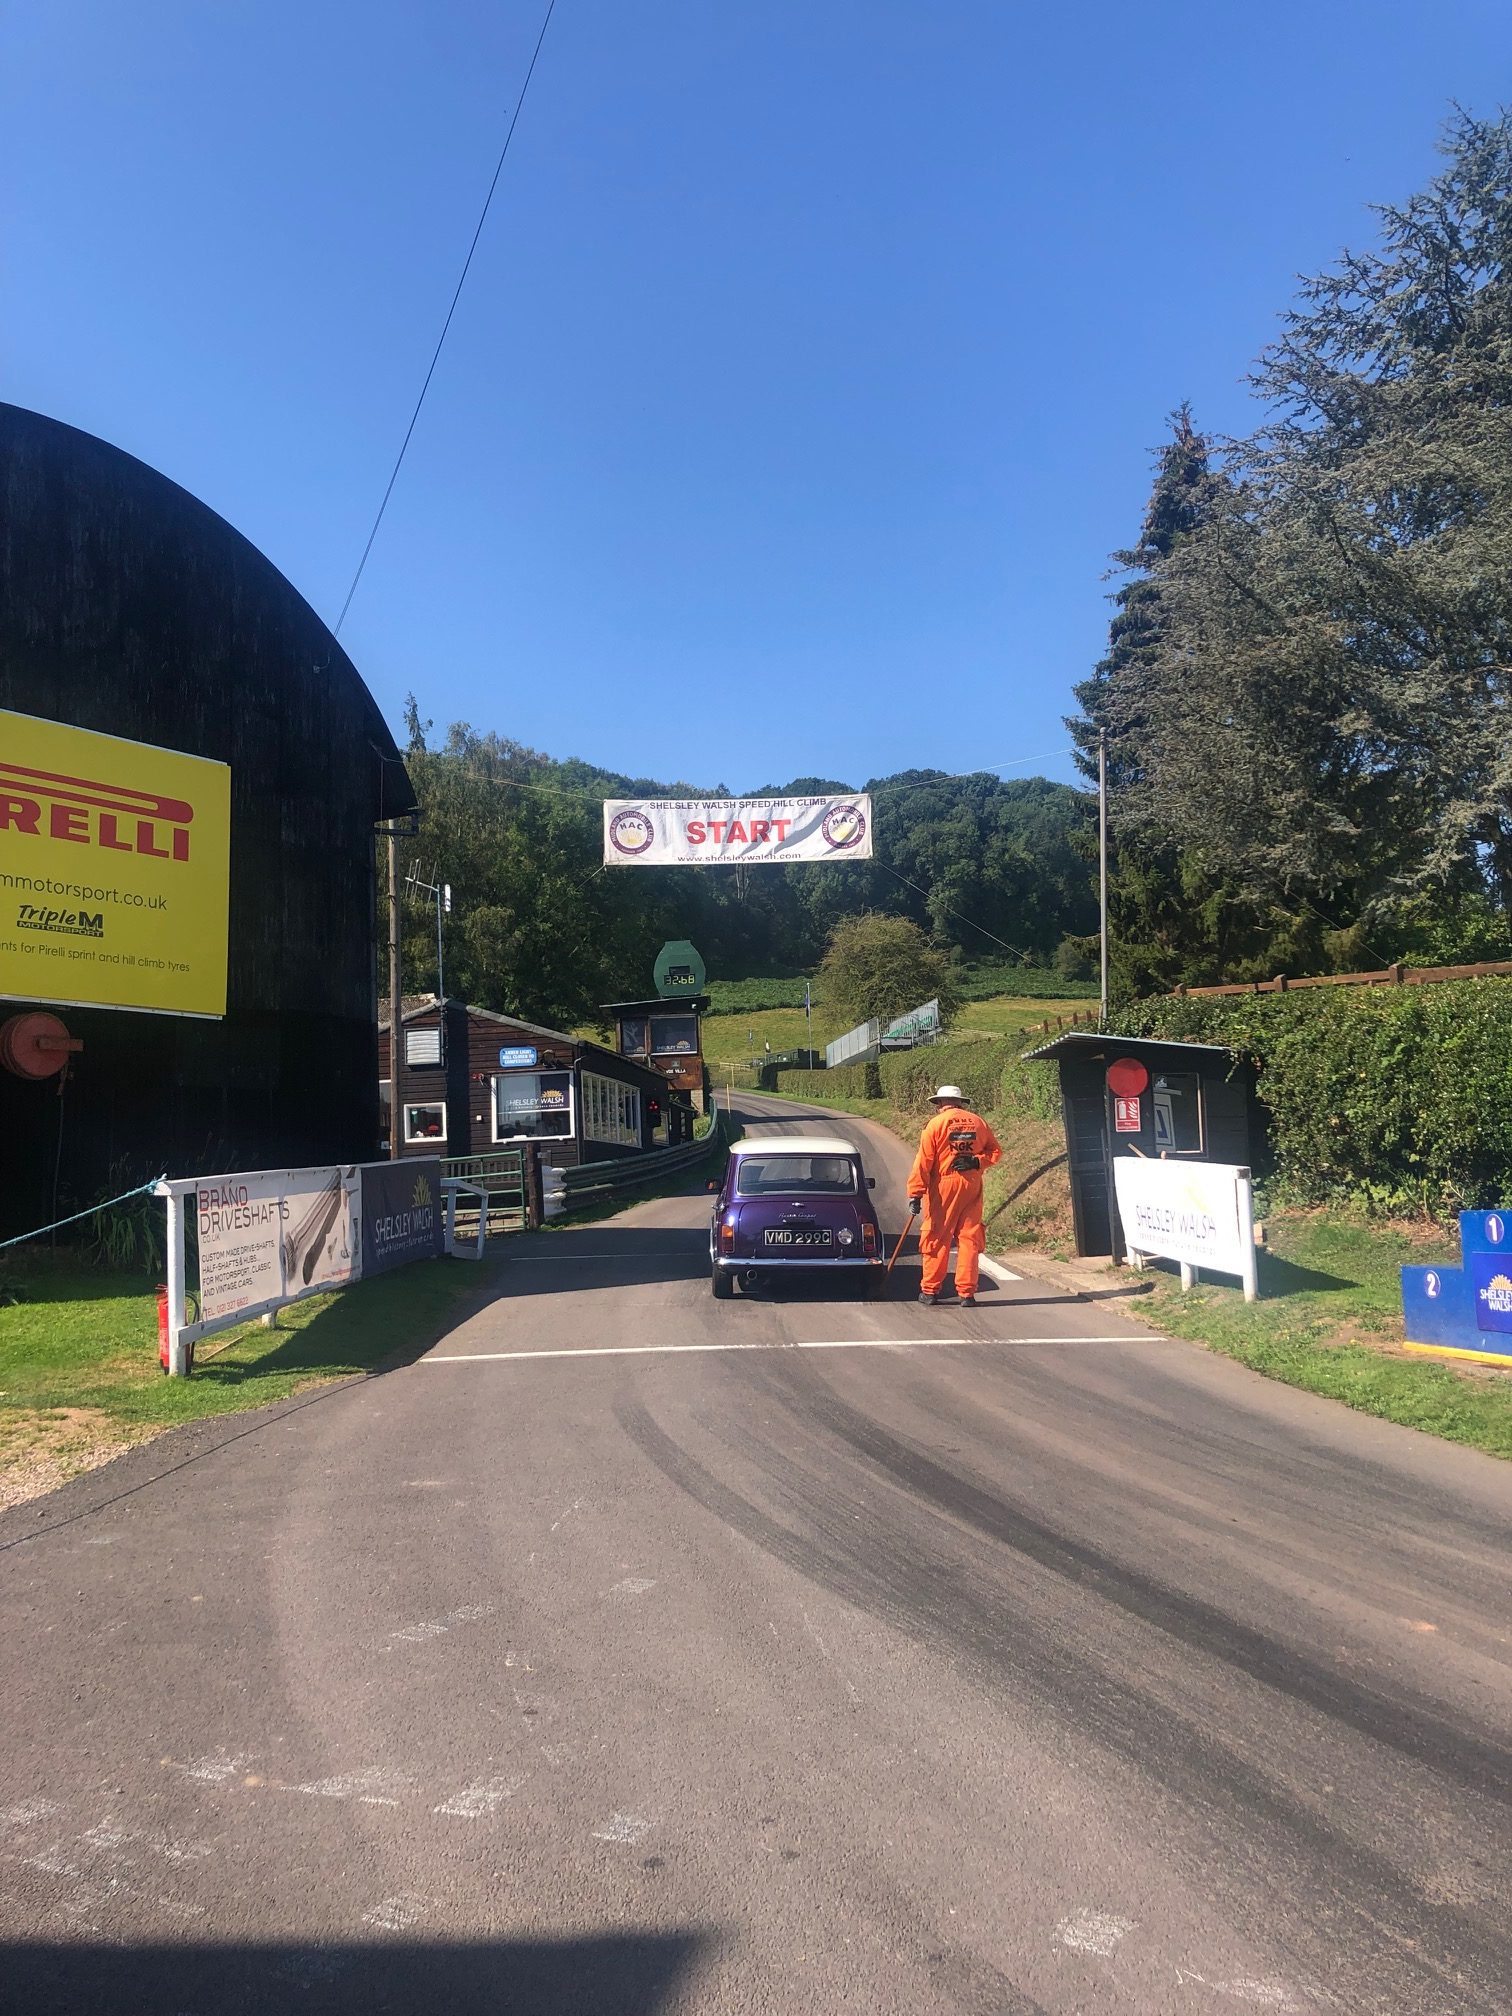 Learning the course at Shelsley Walsh